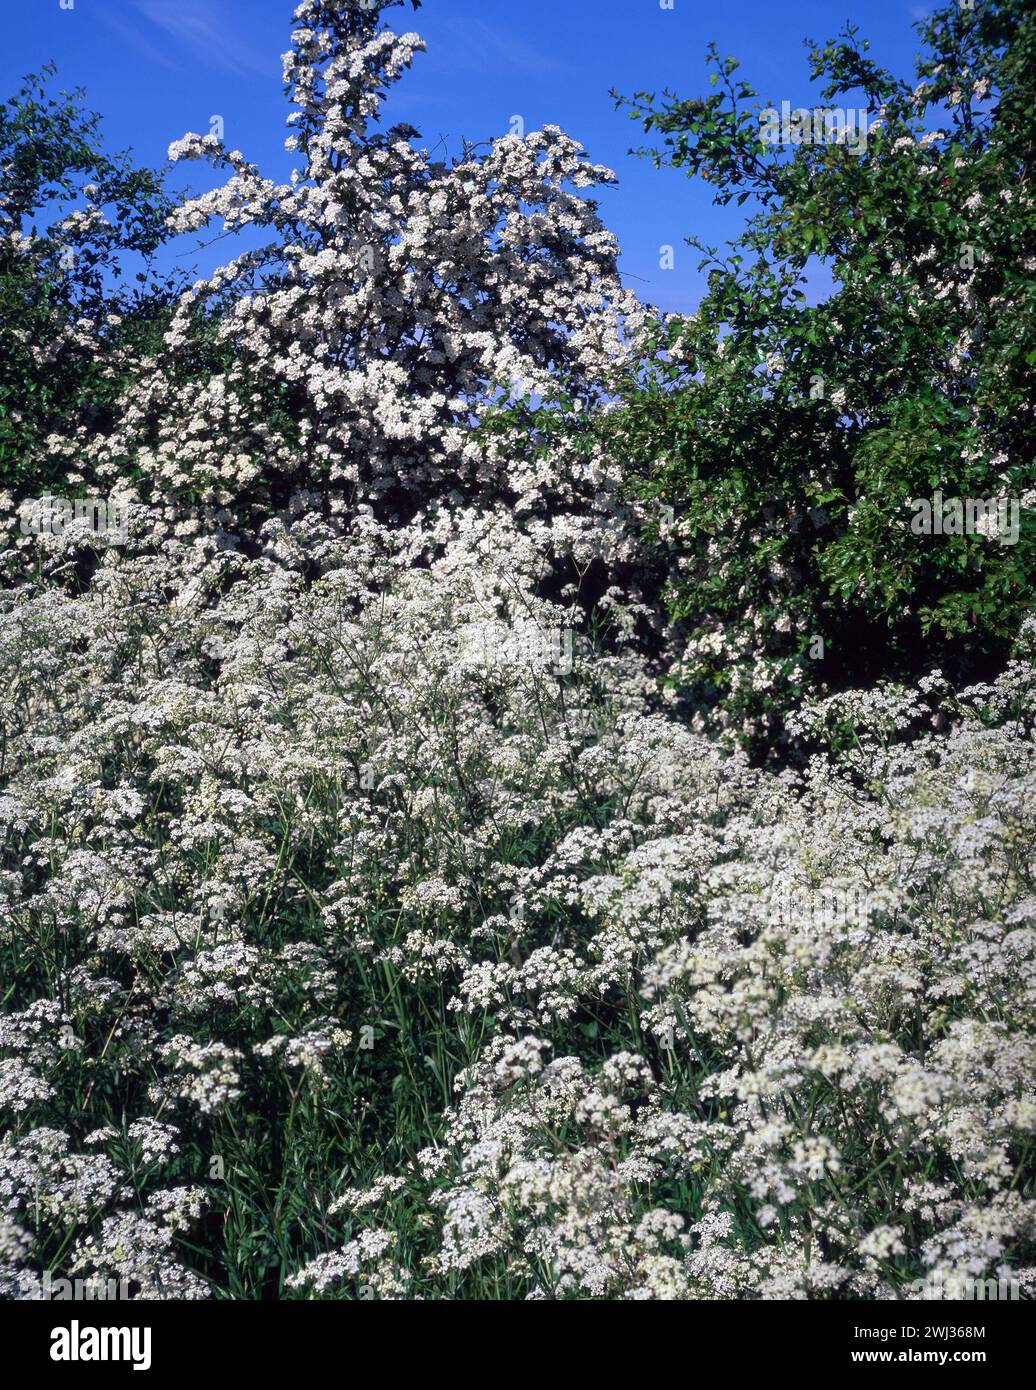 Sunlit white Cow parsley (Anthriscus sylvestris) and Hawthorn (Crataegus monogyna) Hedgerow blossom in Spring with blue sky, England, UK Stock Photo